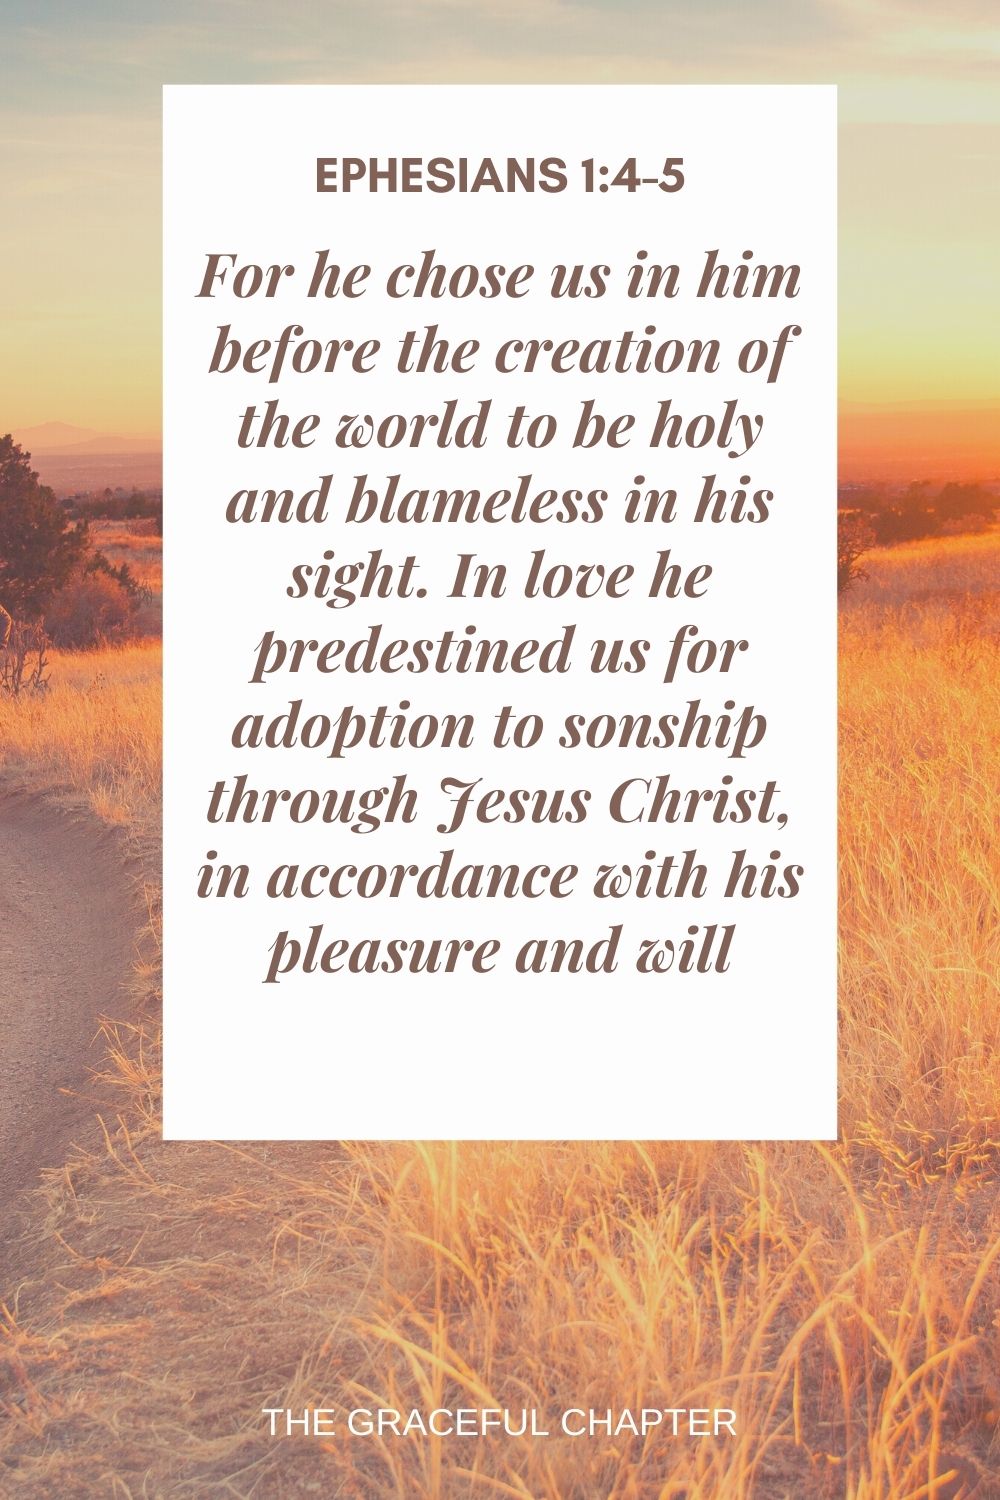 For he chose us in him before the creation of the world to be holy and blameless in his sight. In love he predestined us for adoption to sonship through Jesus Christ, in accordance with his pleasure and will Ephesians 1:4-5